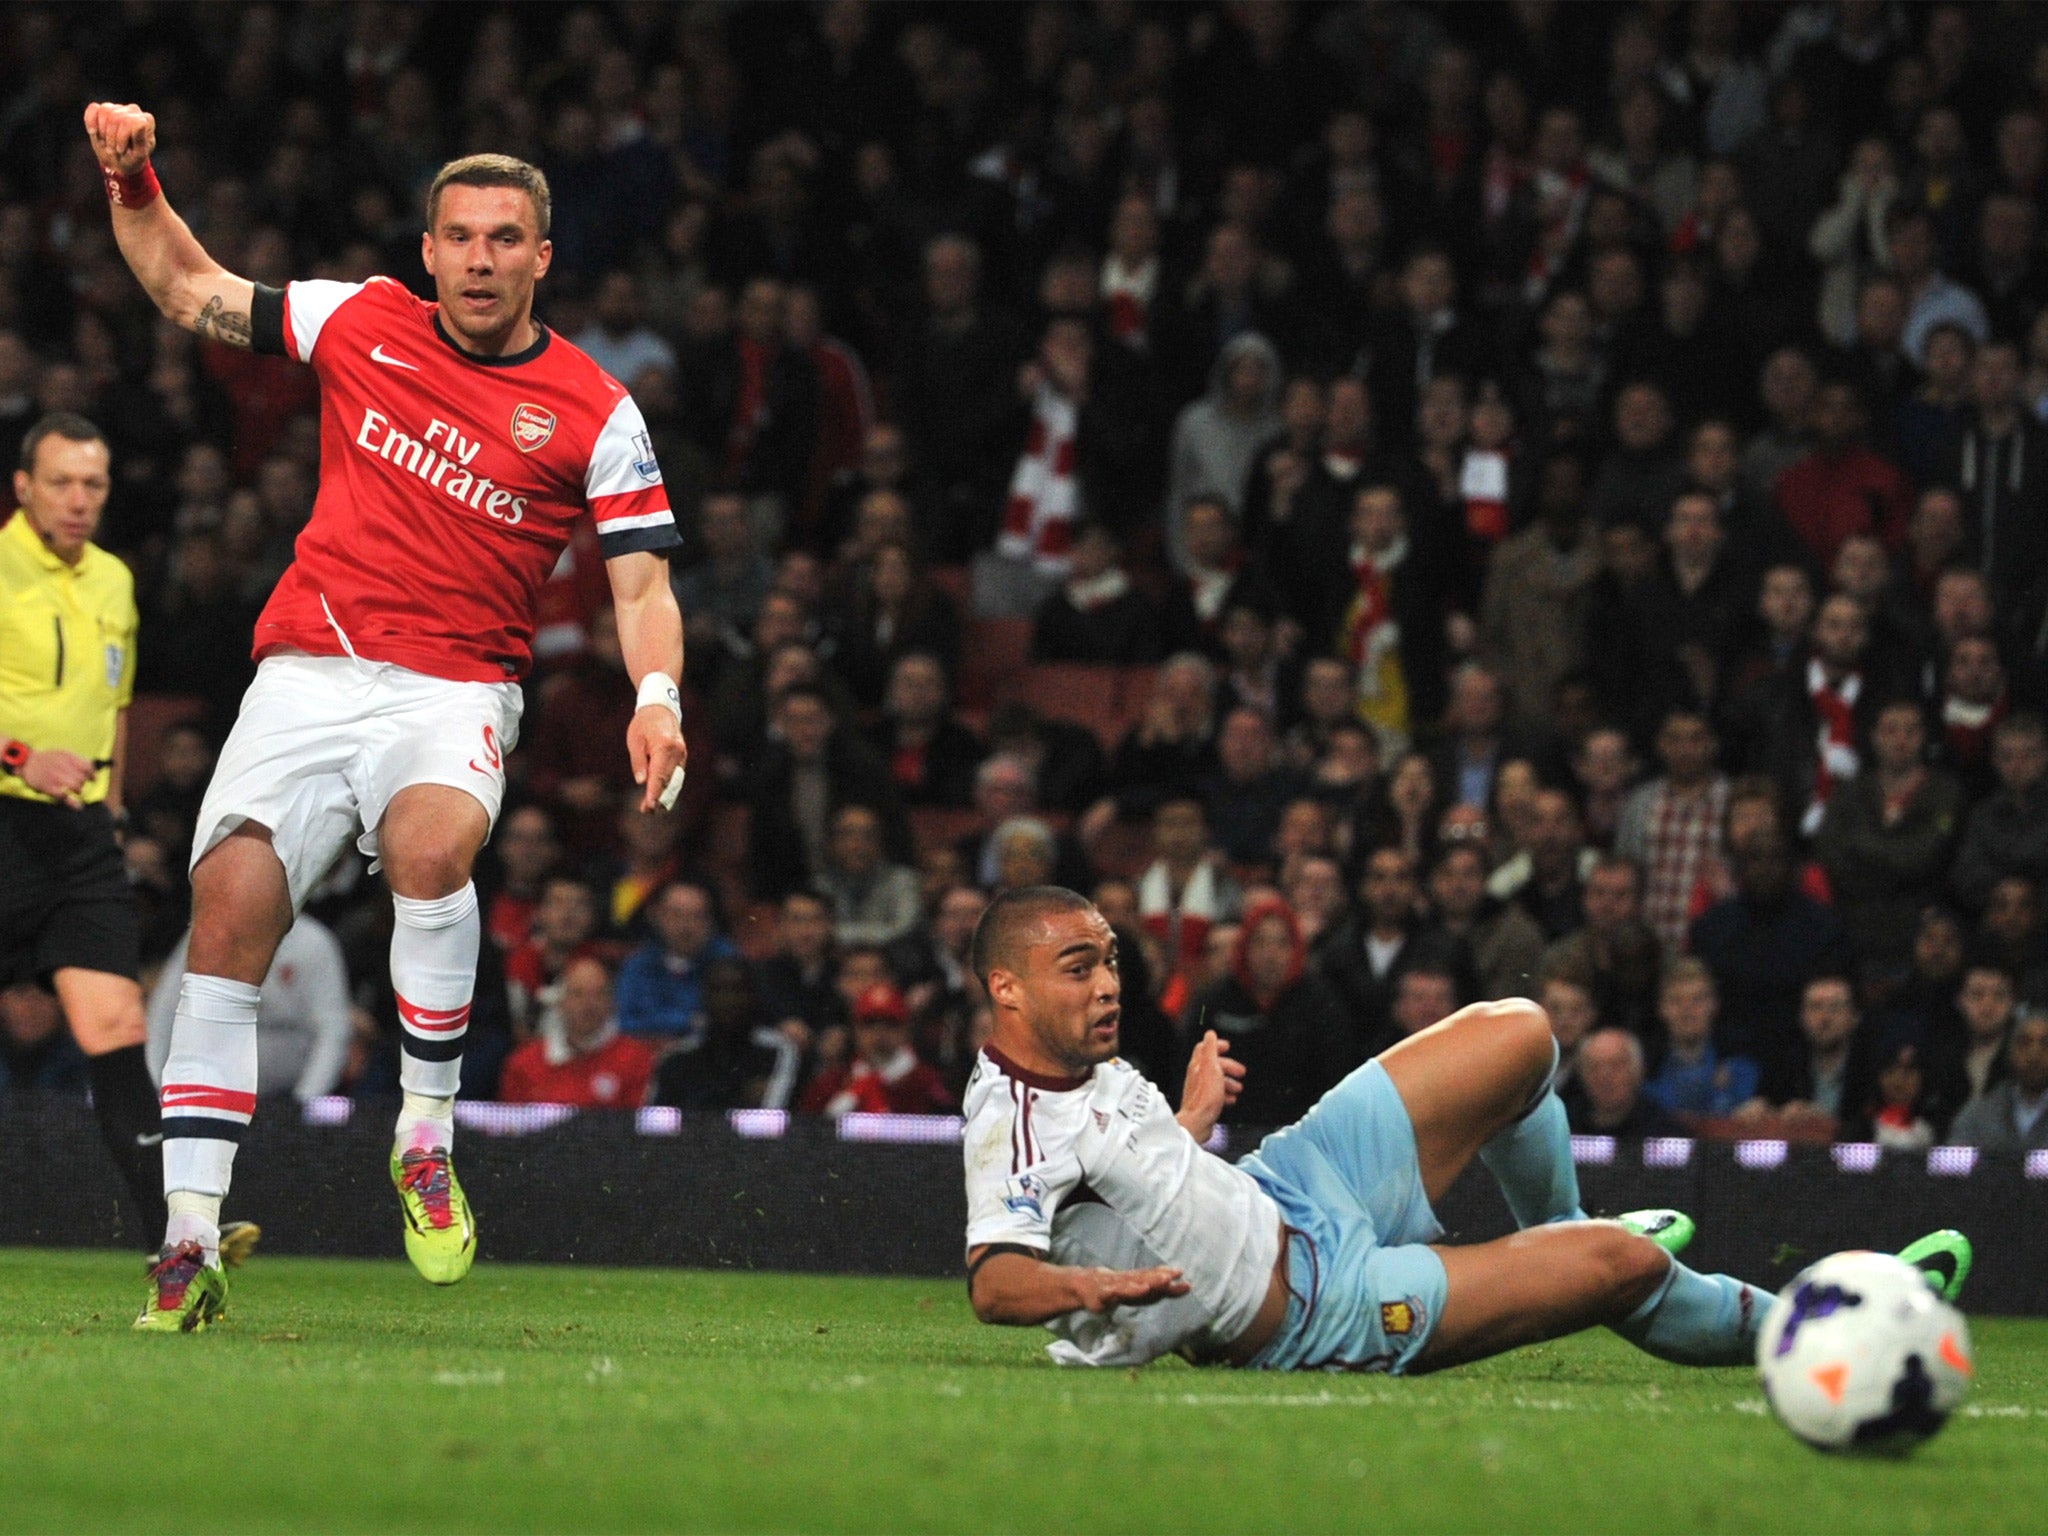 Lukas Podolski equalises with a precise, powerful finish